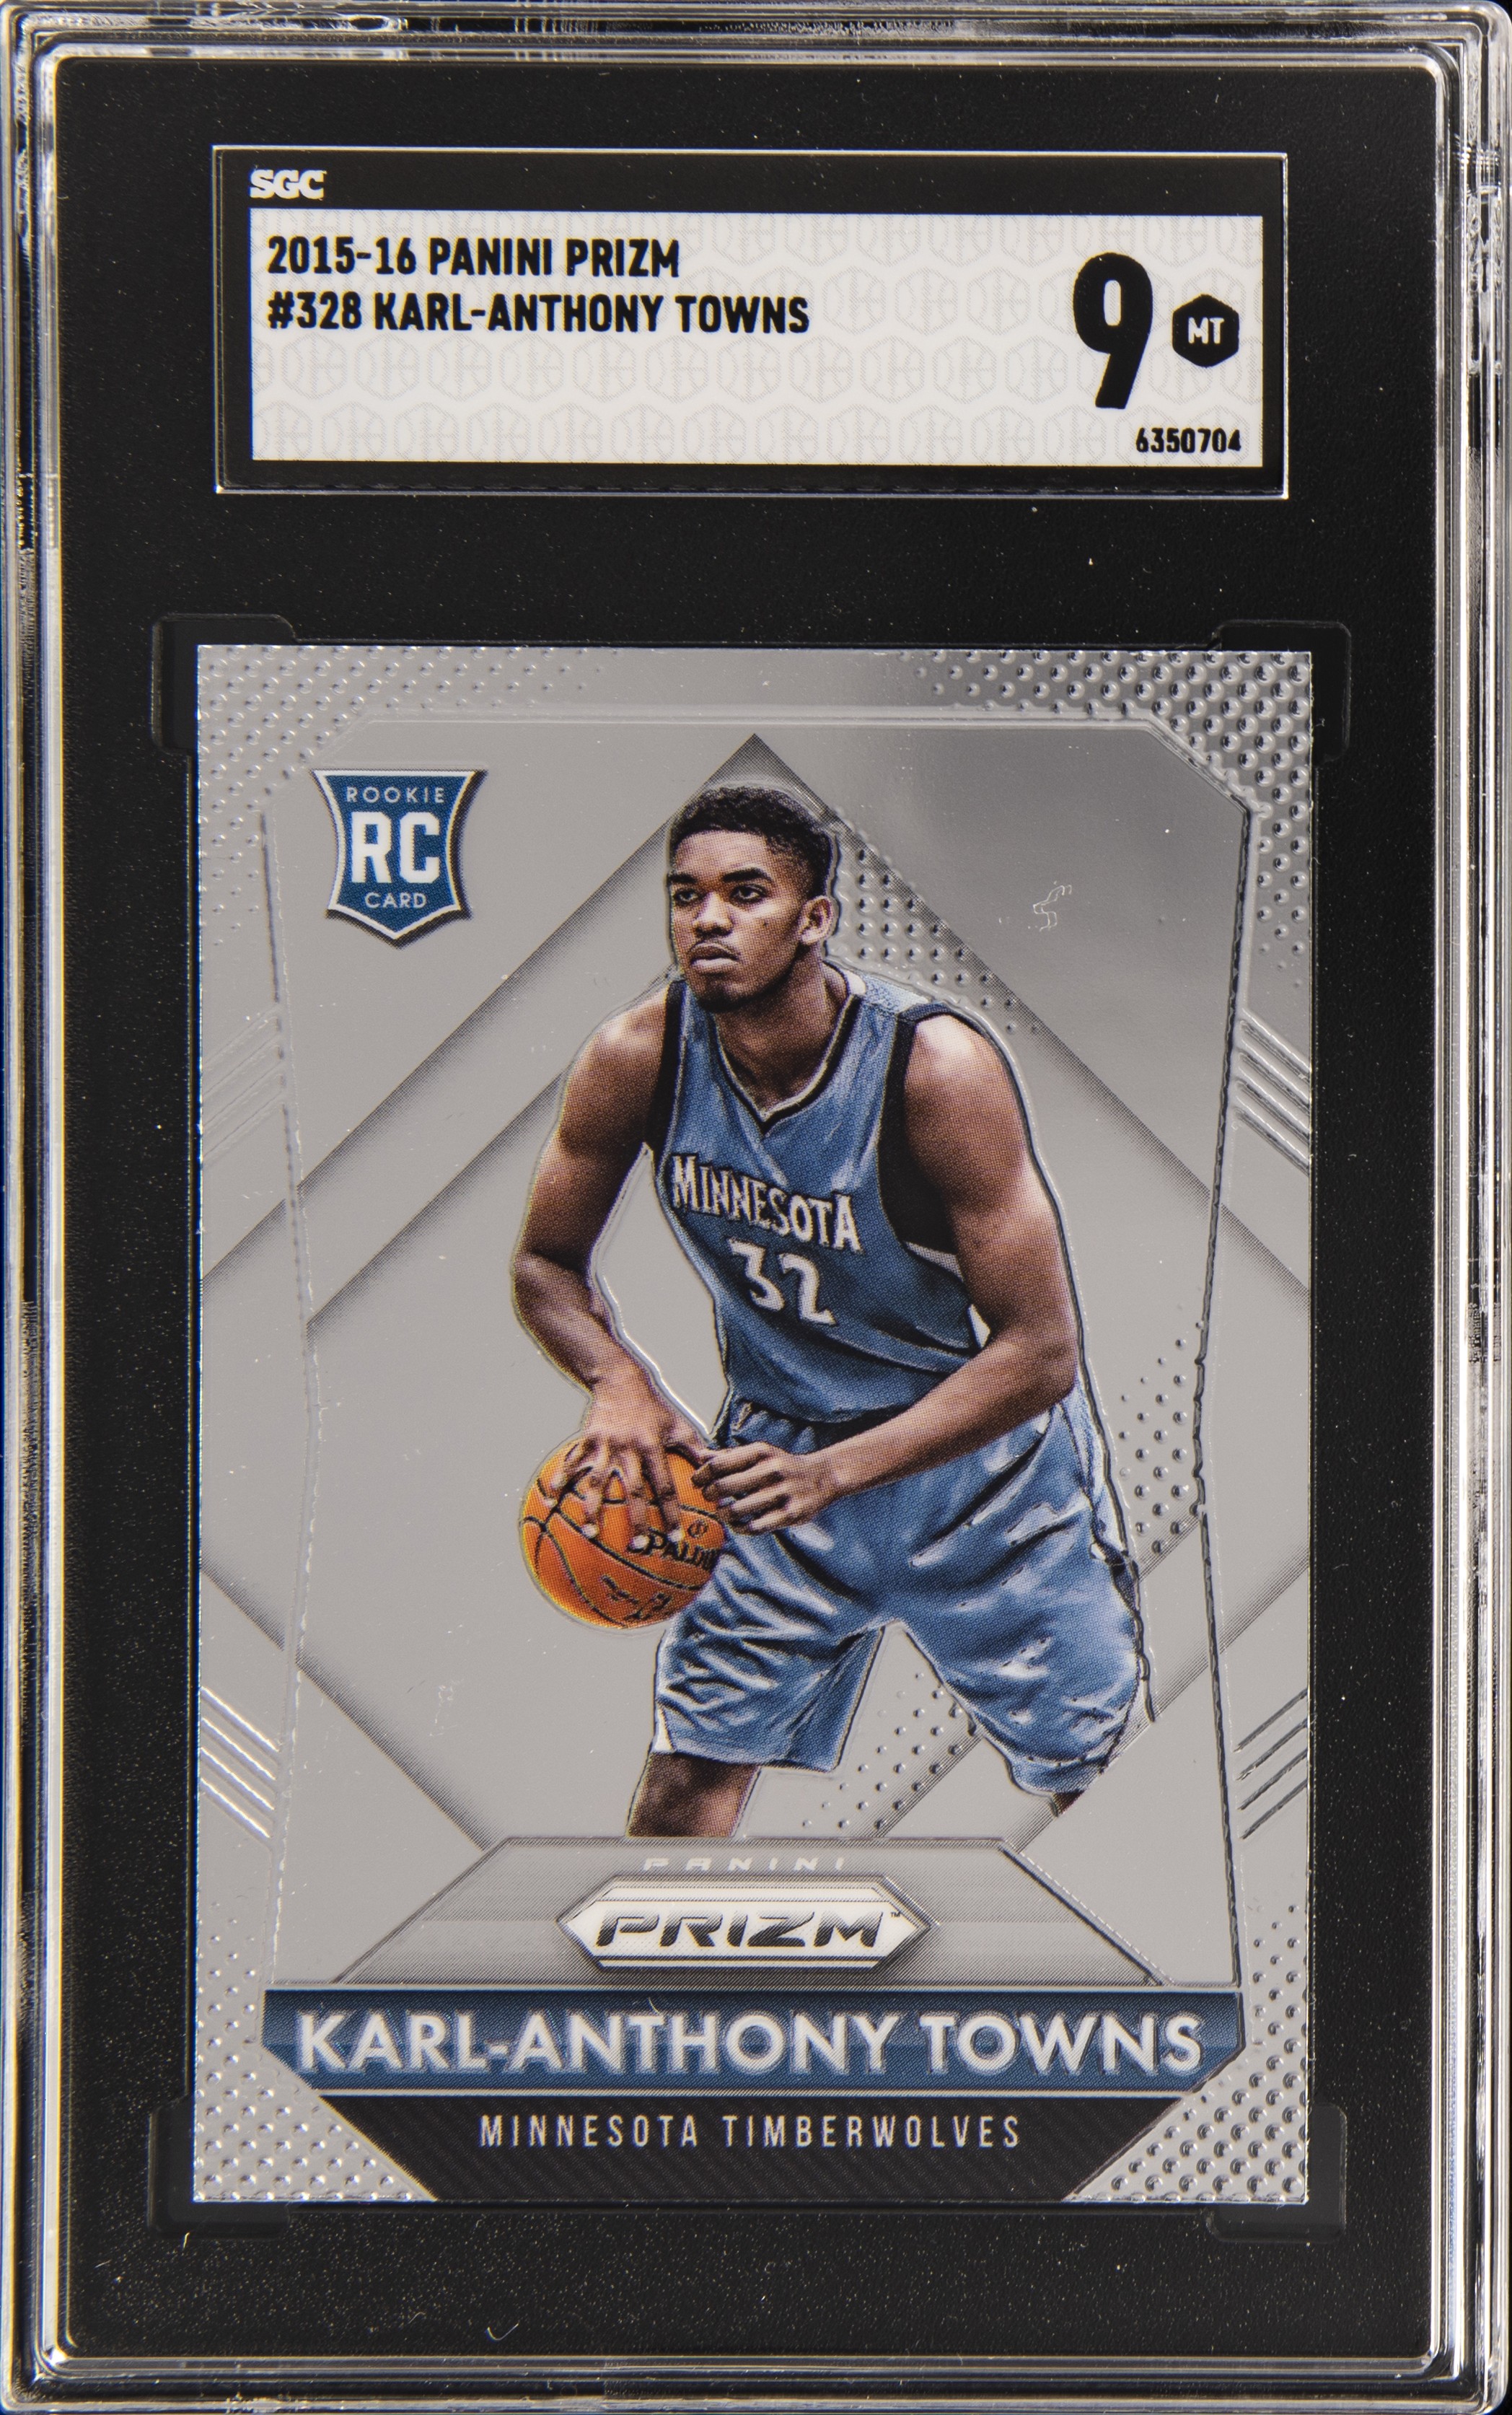 2015-16 Panini Prizm #328 Karl-Anthony Towns Rookie Card – SGC MT 9